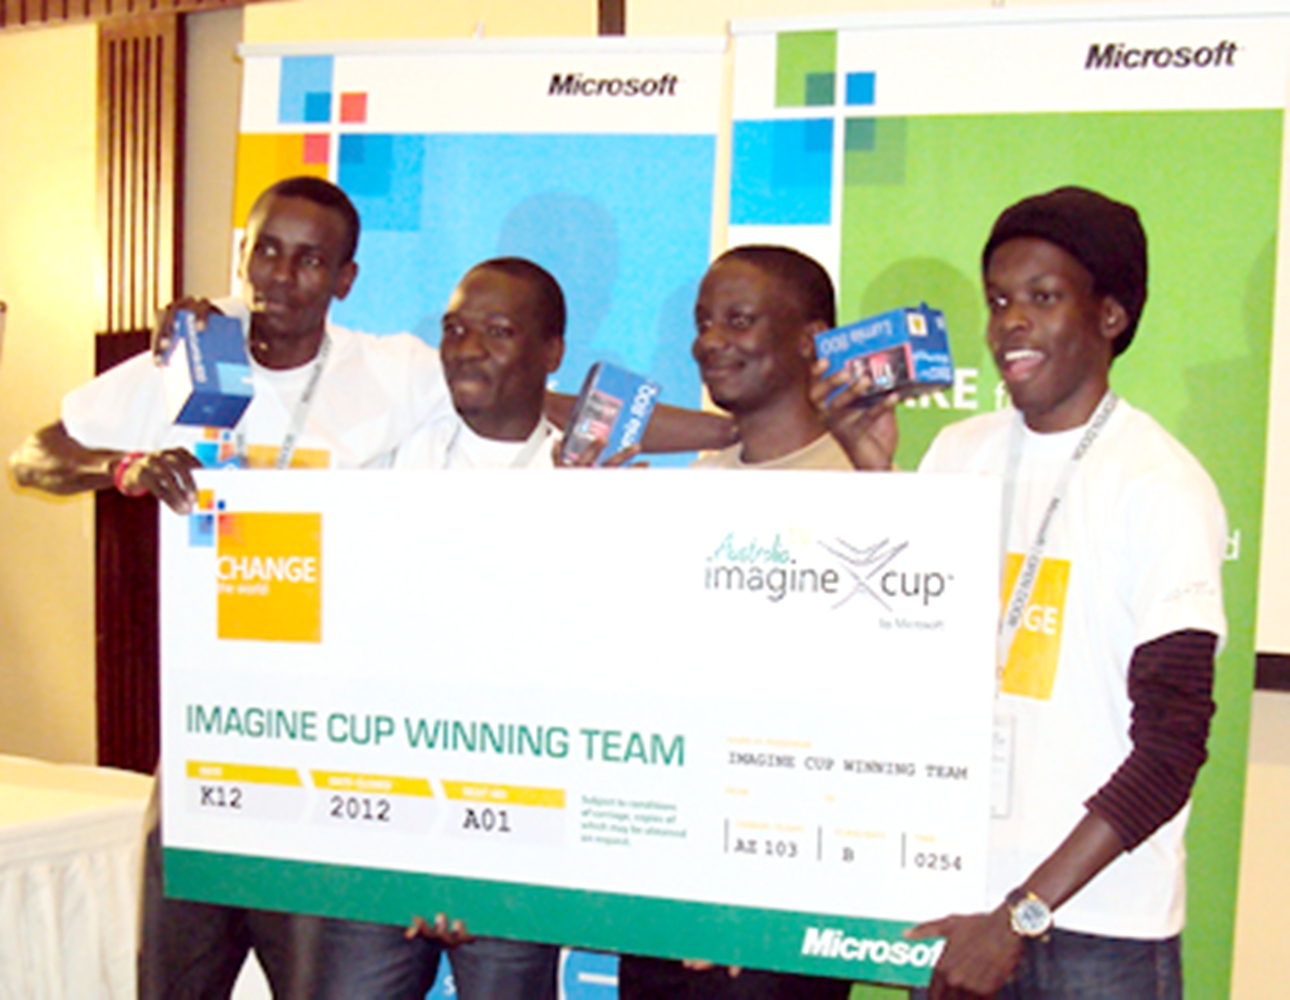 The Cipher 256 Team L-R: Joshua Okello, Josiah Kavuma, Joseph Kaizzi (their mentor) and Aaron Tushabe after winning the Microsoft Imagine Cup competition with their WinSenga Mobile App.